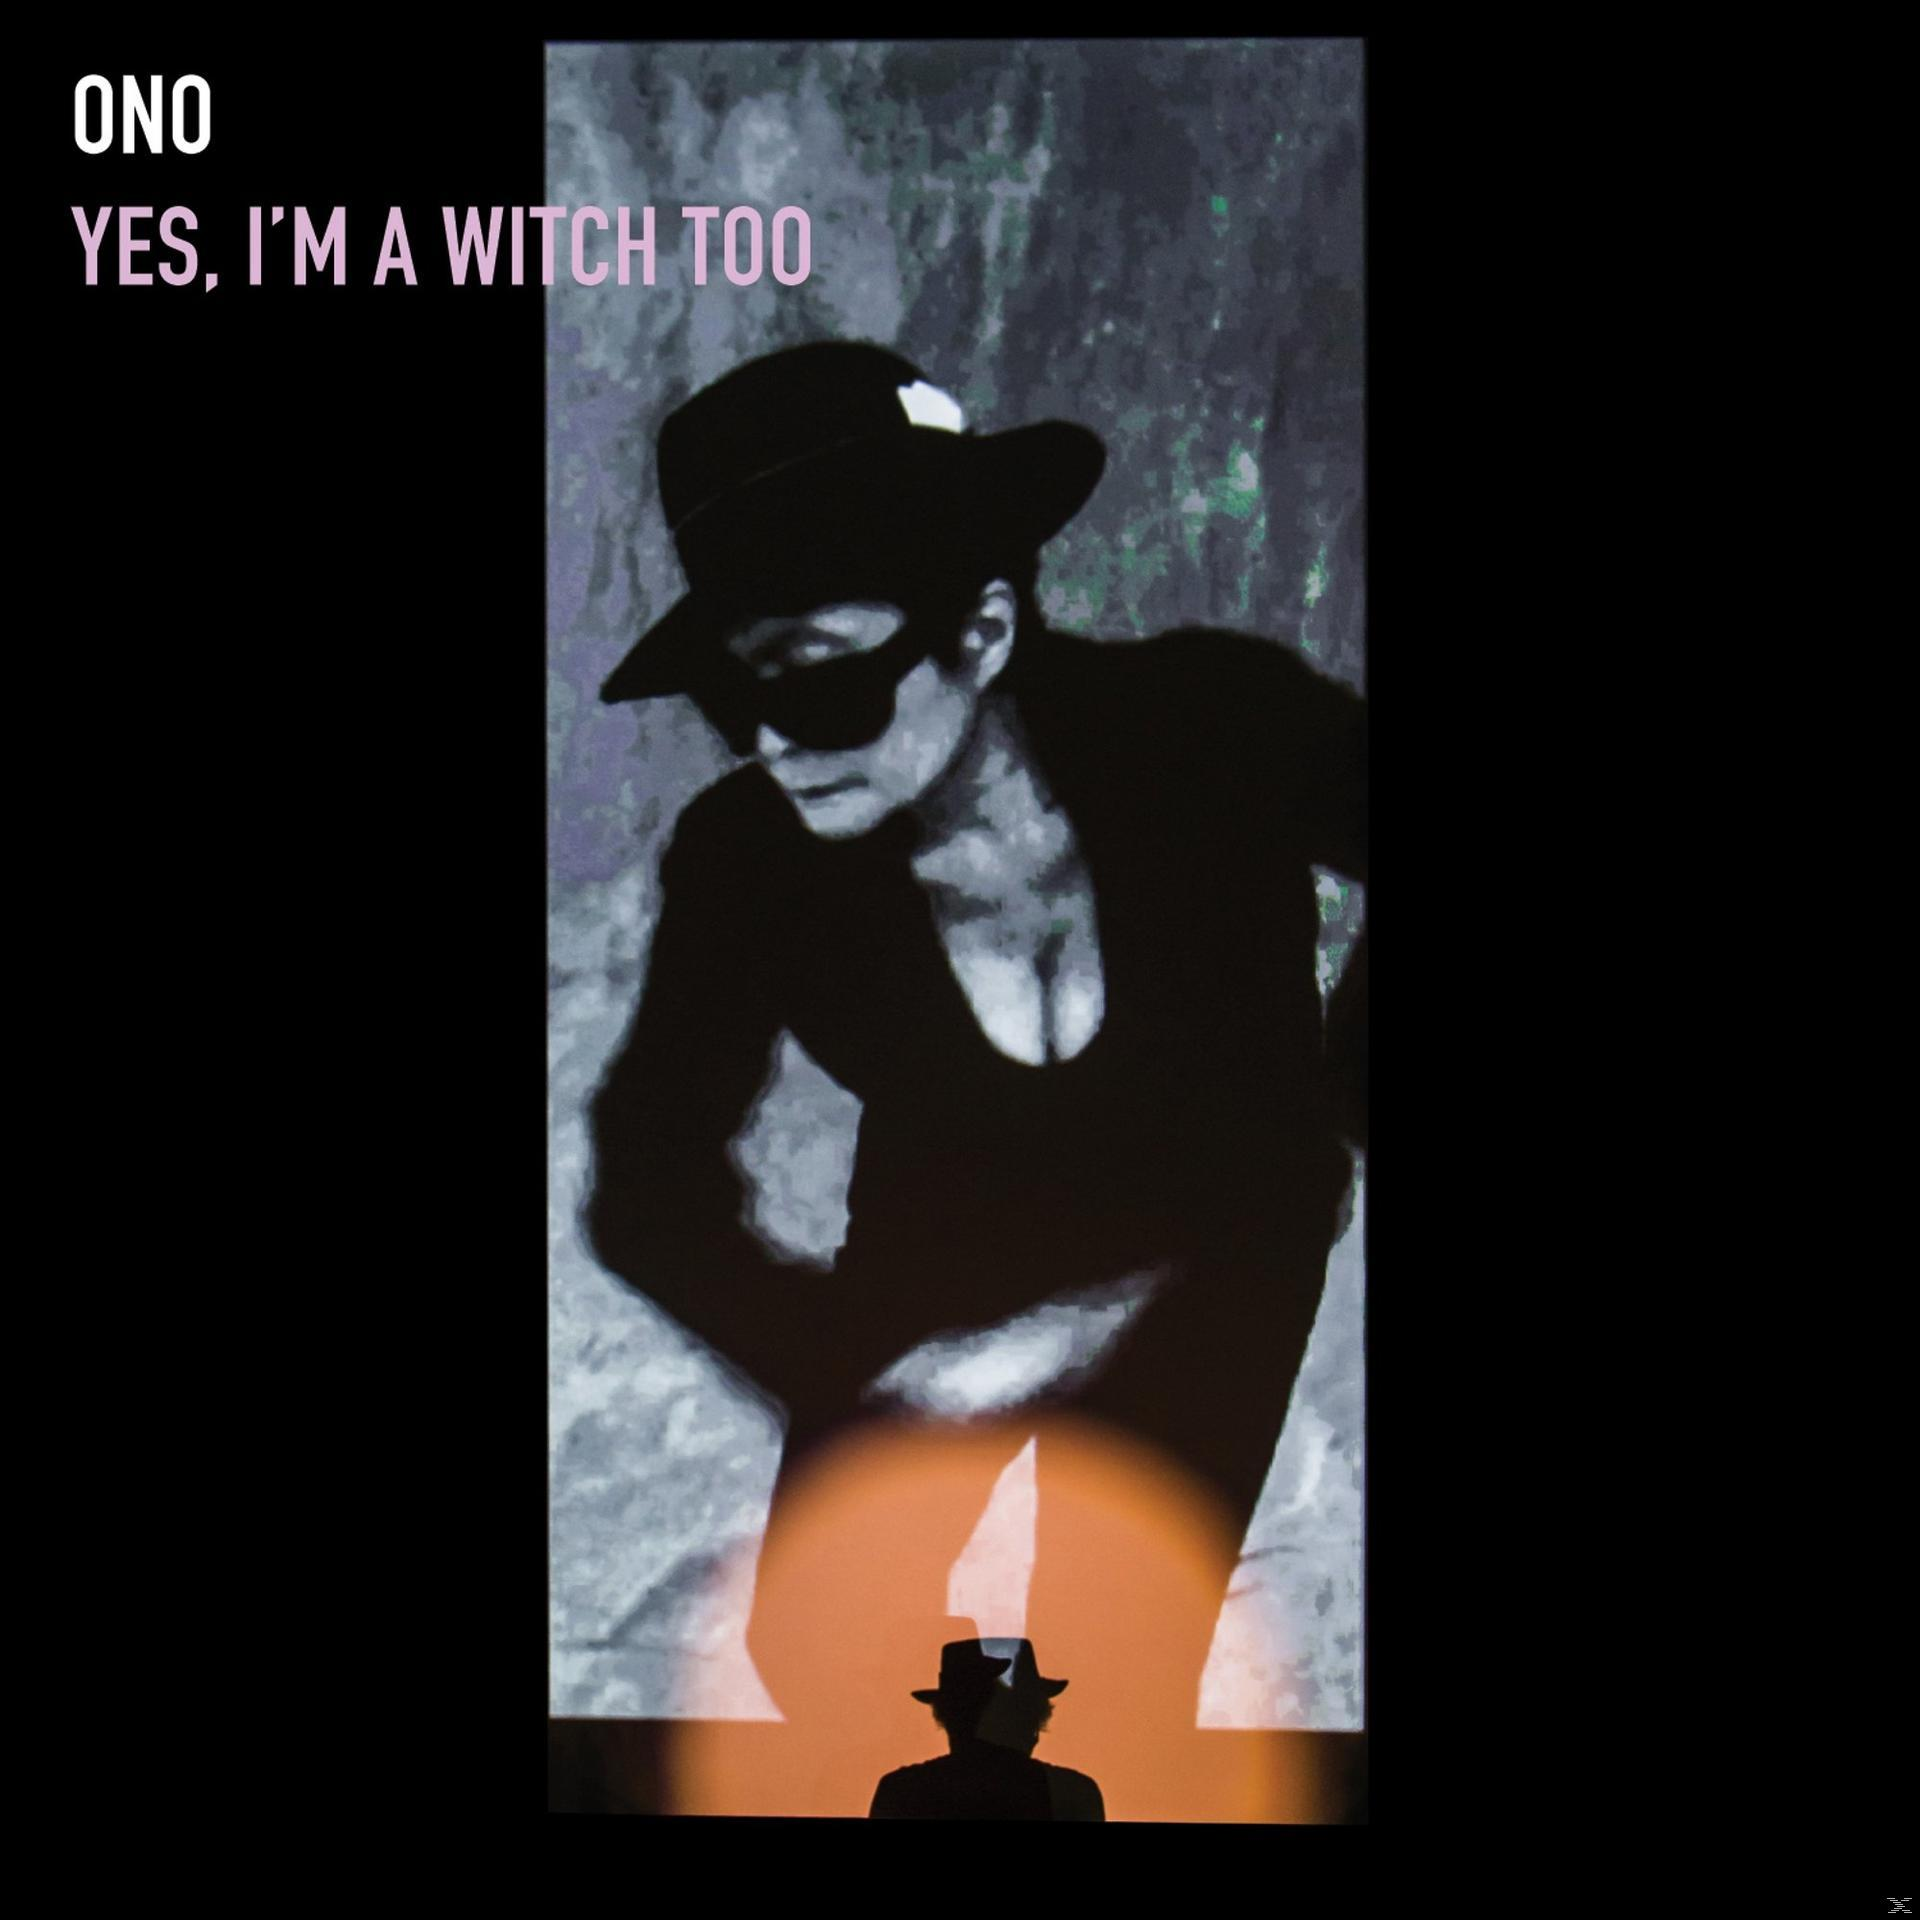 Yoko Ono, VARIOUS - A - (Vinyl) Witch (2lp) I\'m Yes, Too